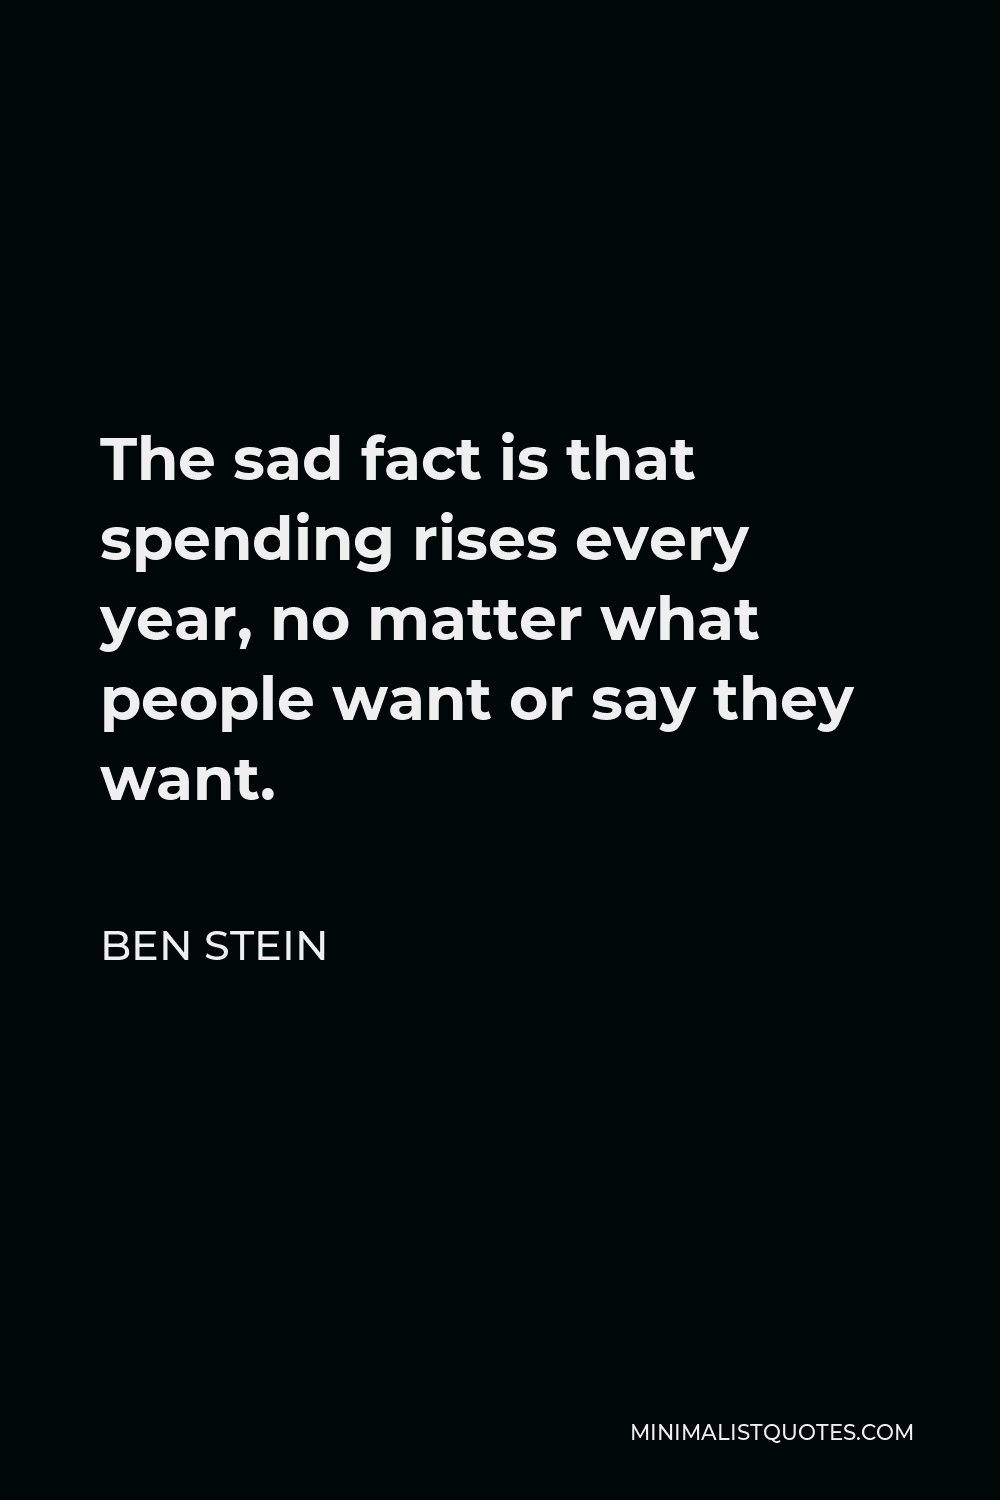 Ben Stein Quote - The sad fact is that spending rises every year, no matter what people want or say they want.